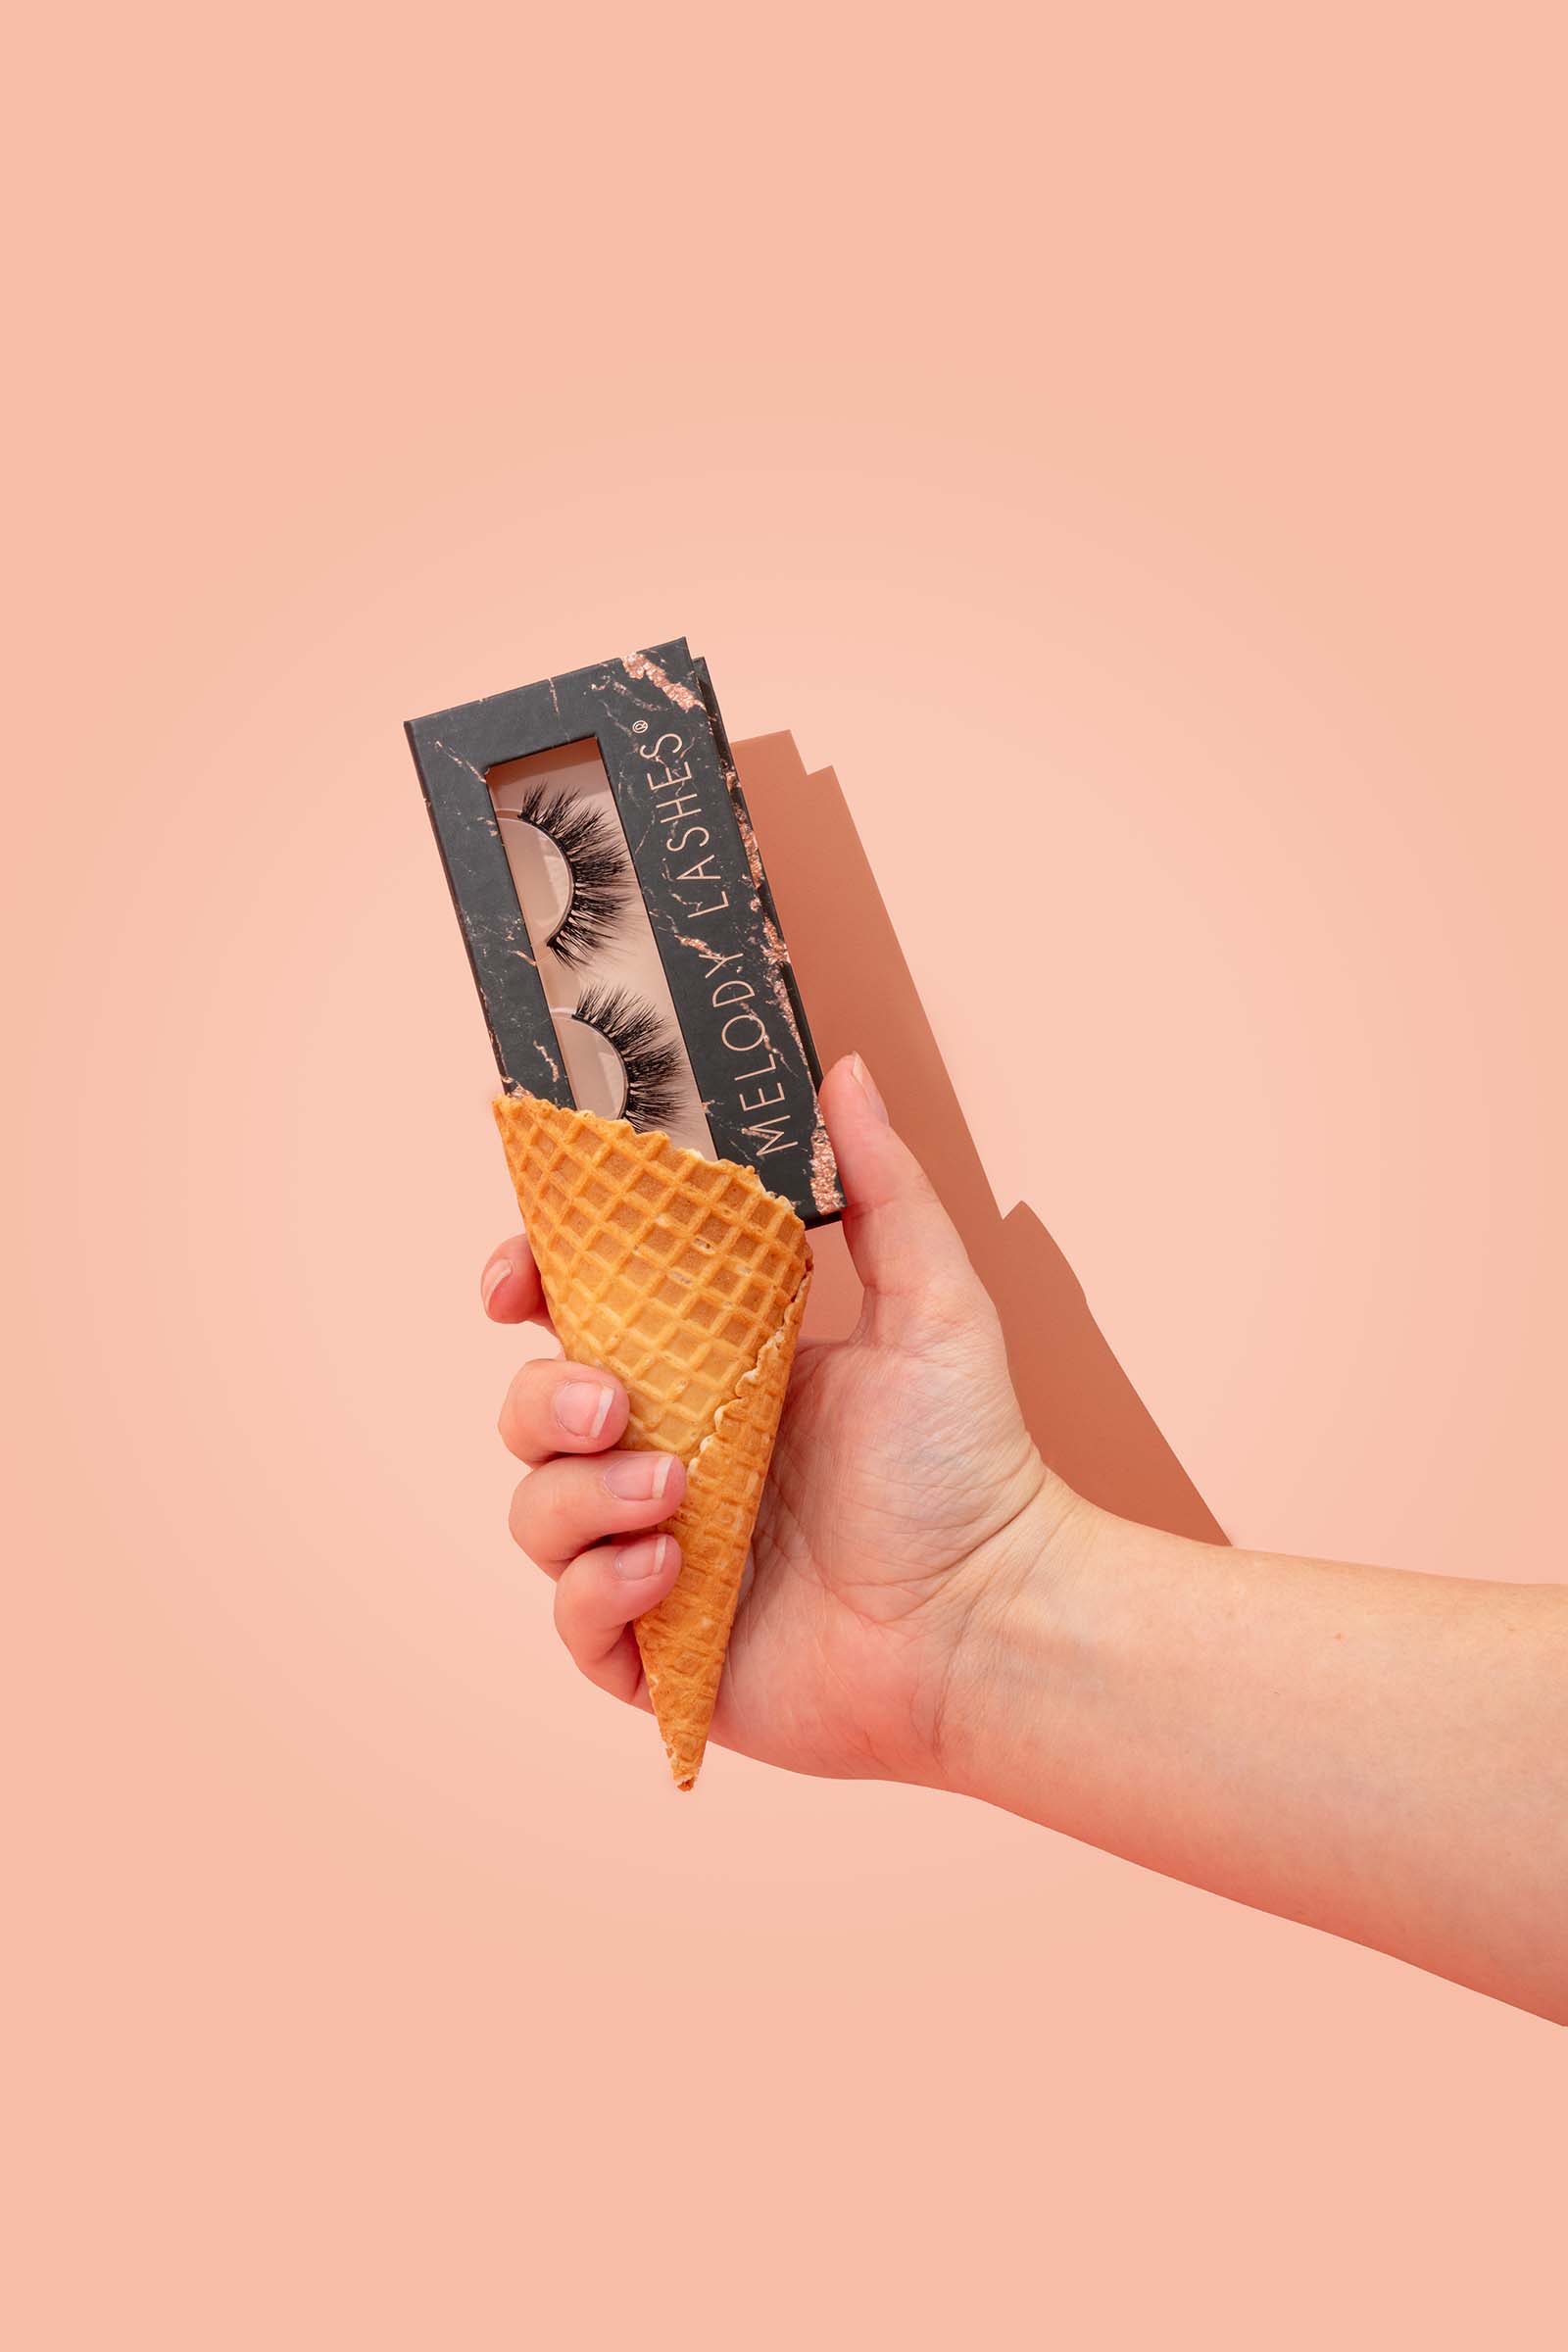 Minimal Product Photography for a False Lash Brand. Styled Product Stills by Colourpop Studio. Minimal Summer Styled Product Photos. Lashes in an Icecream Cone